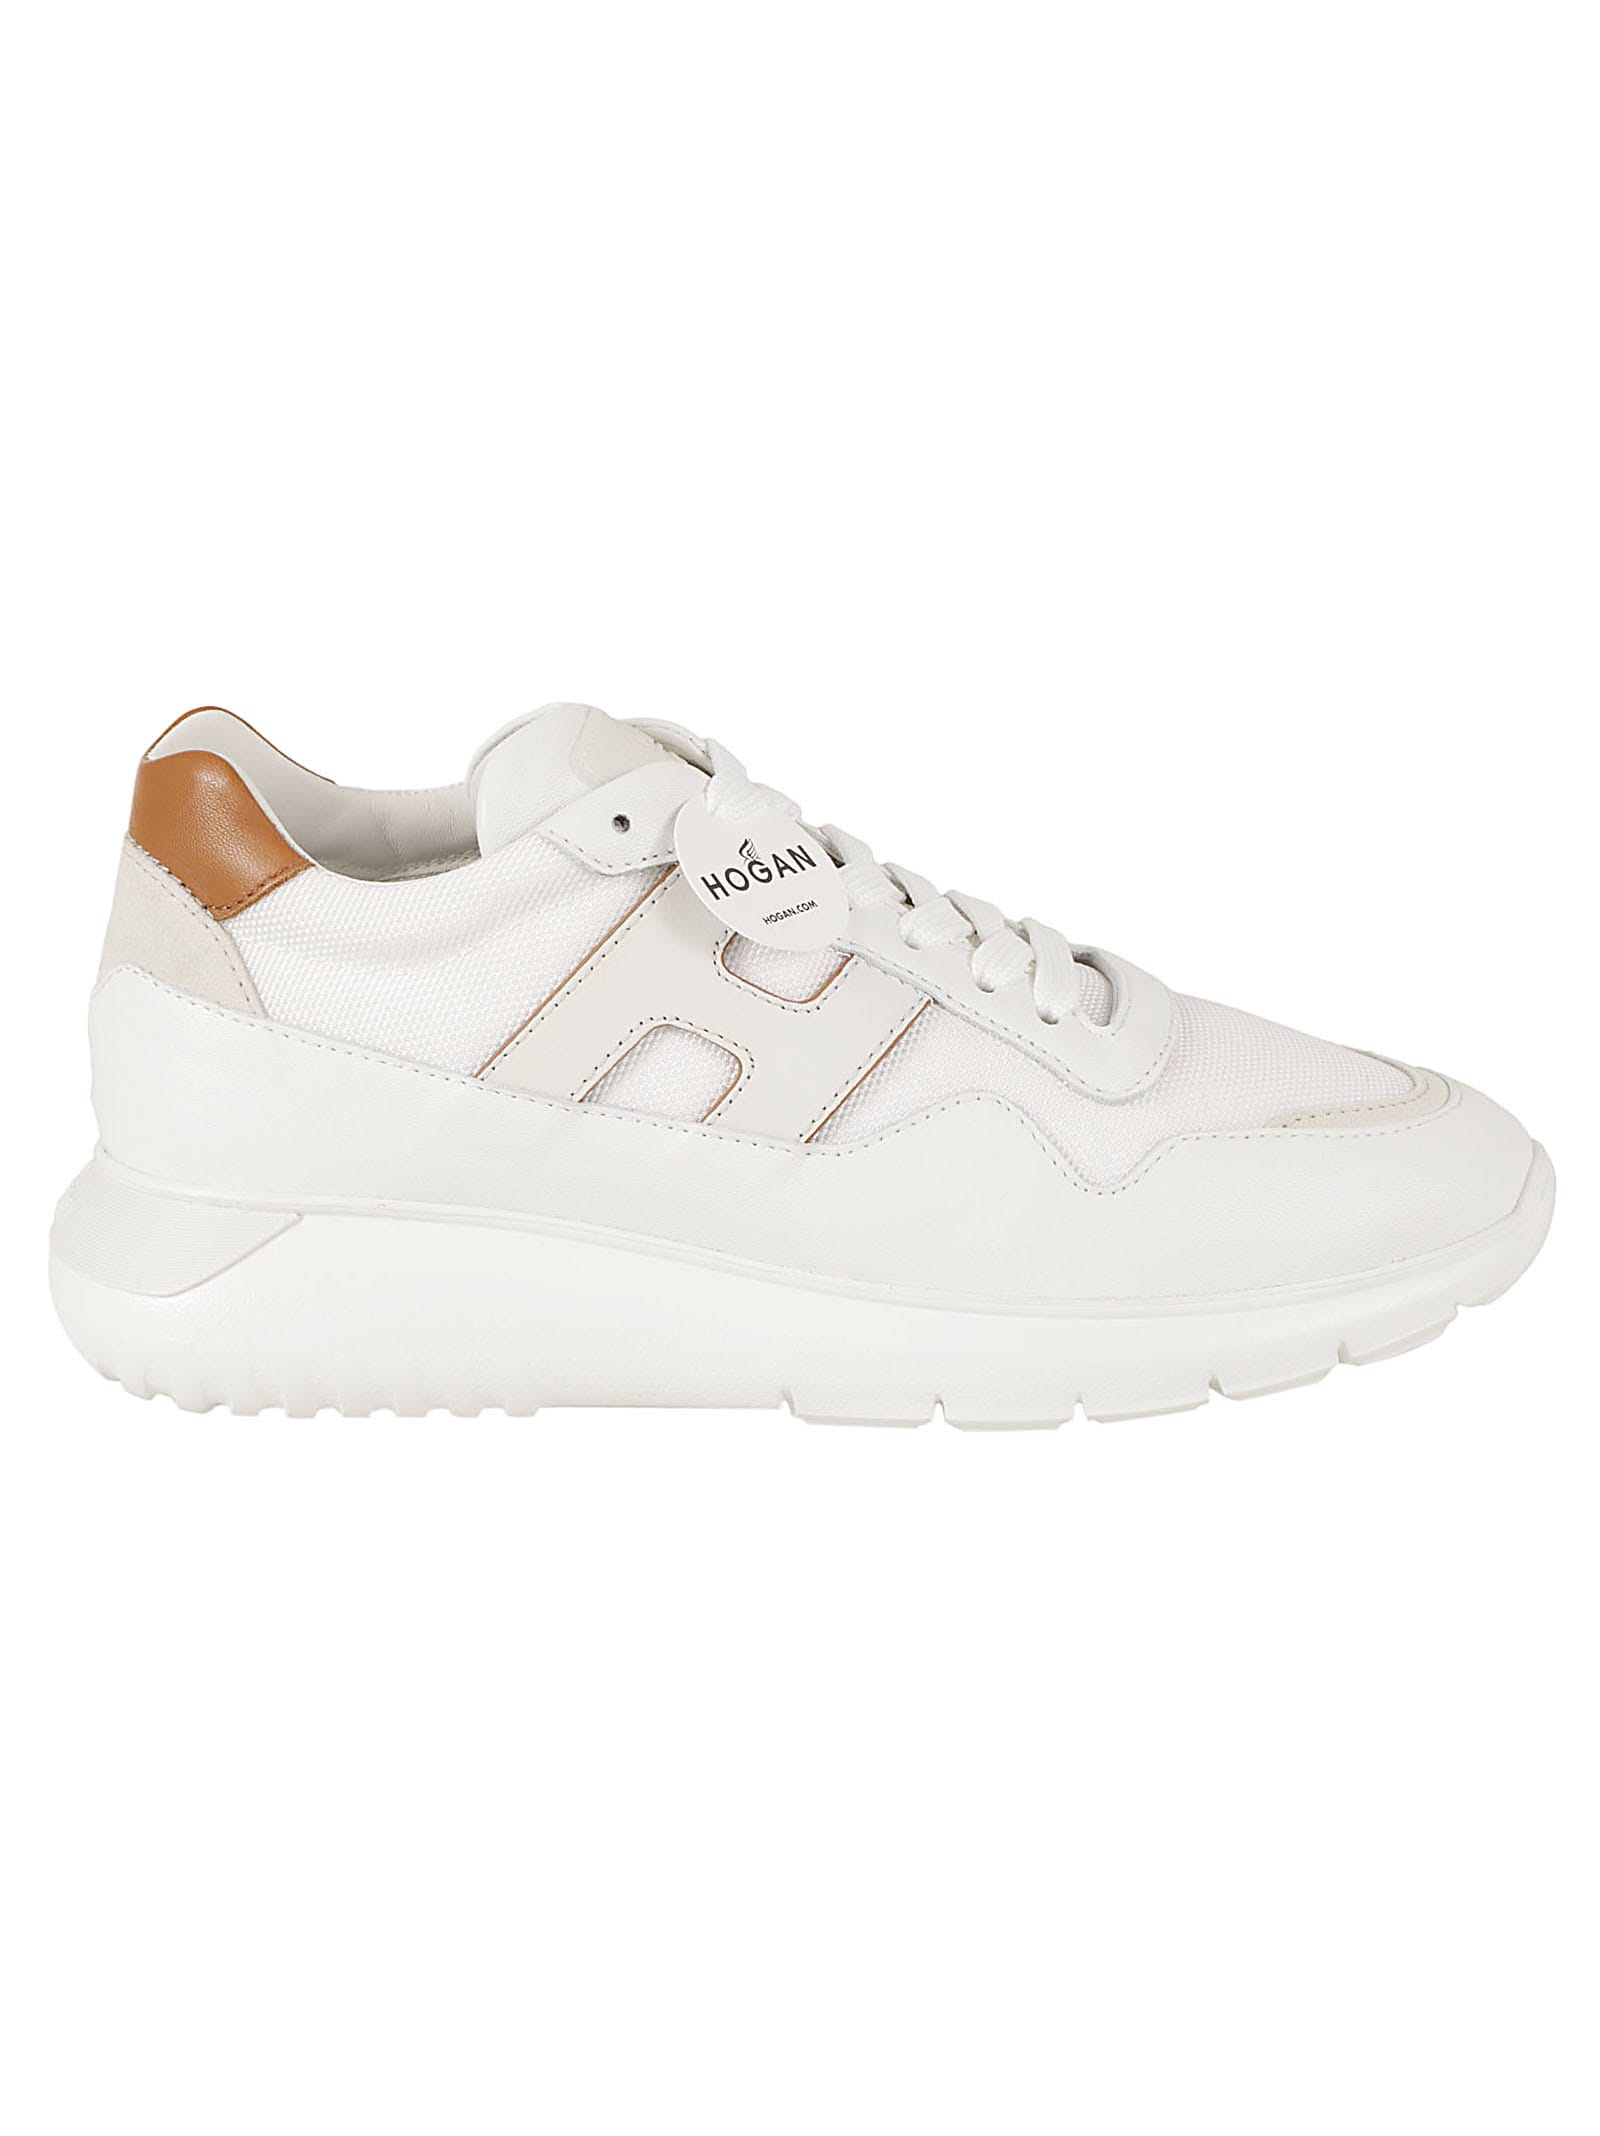 Hogan Interactive3 Sneakers In White